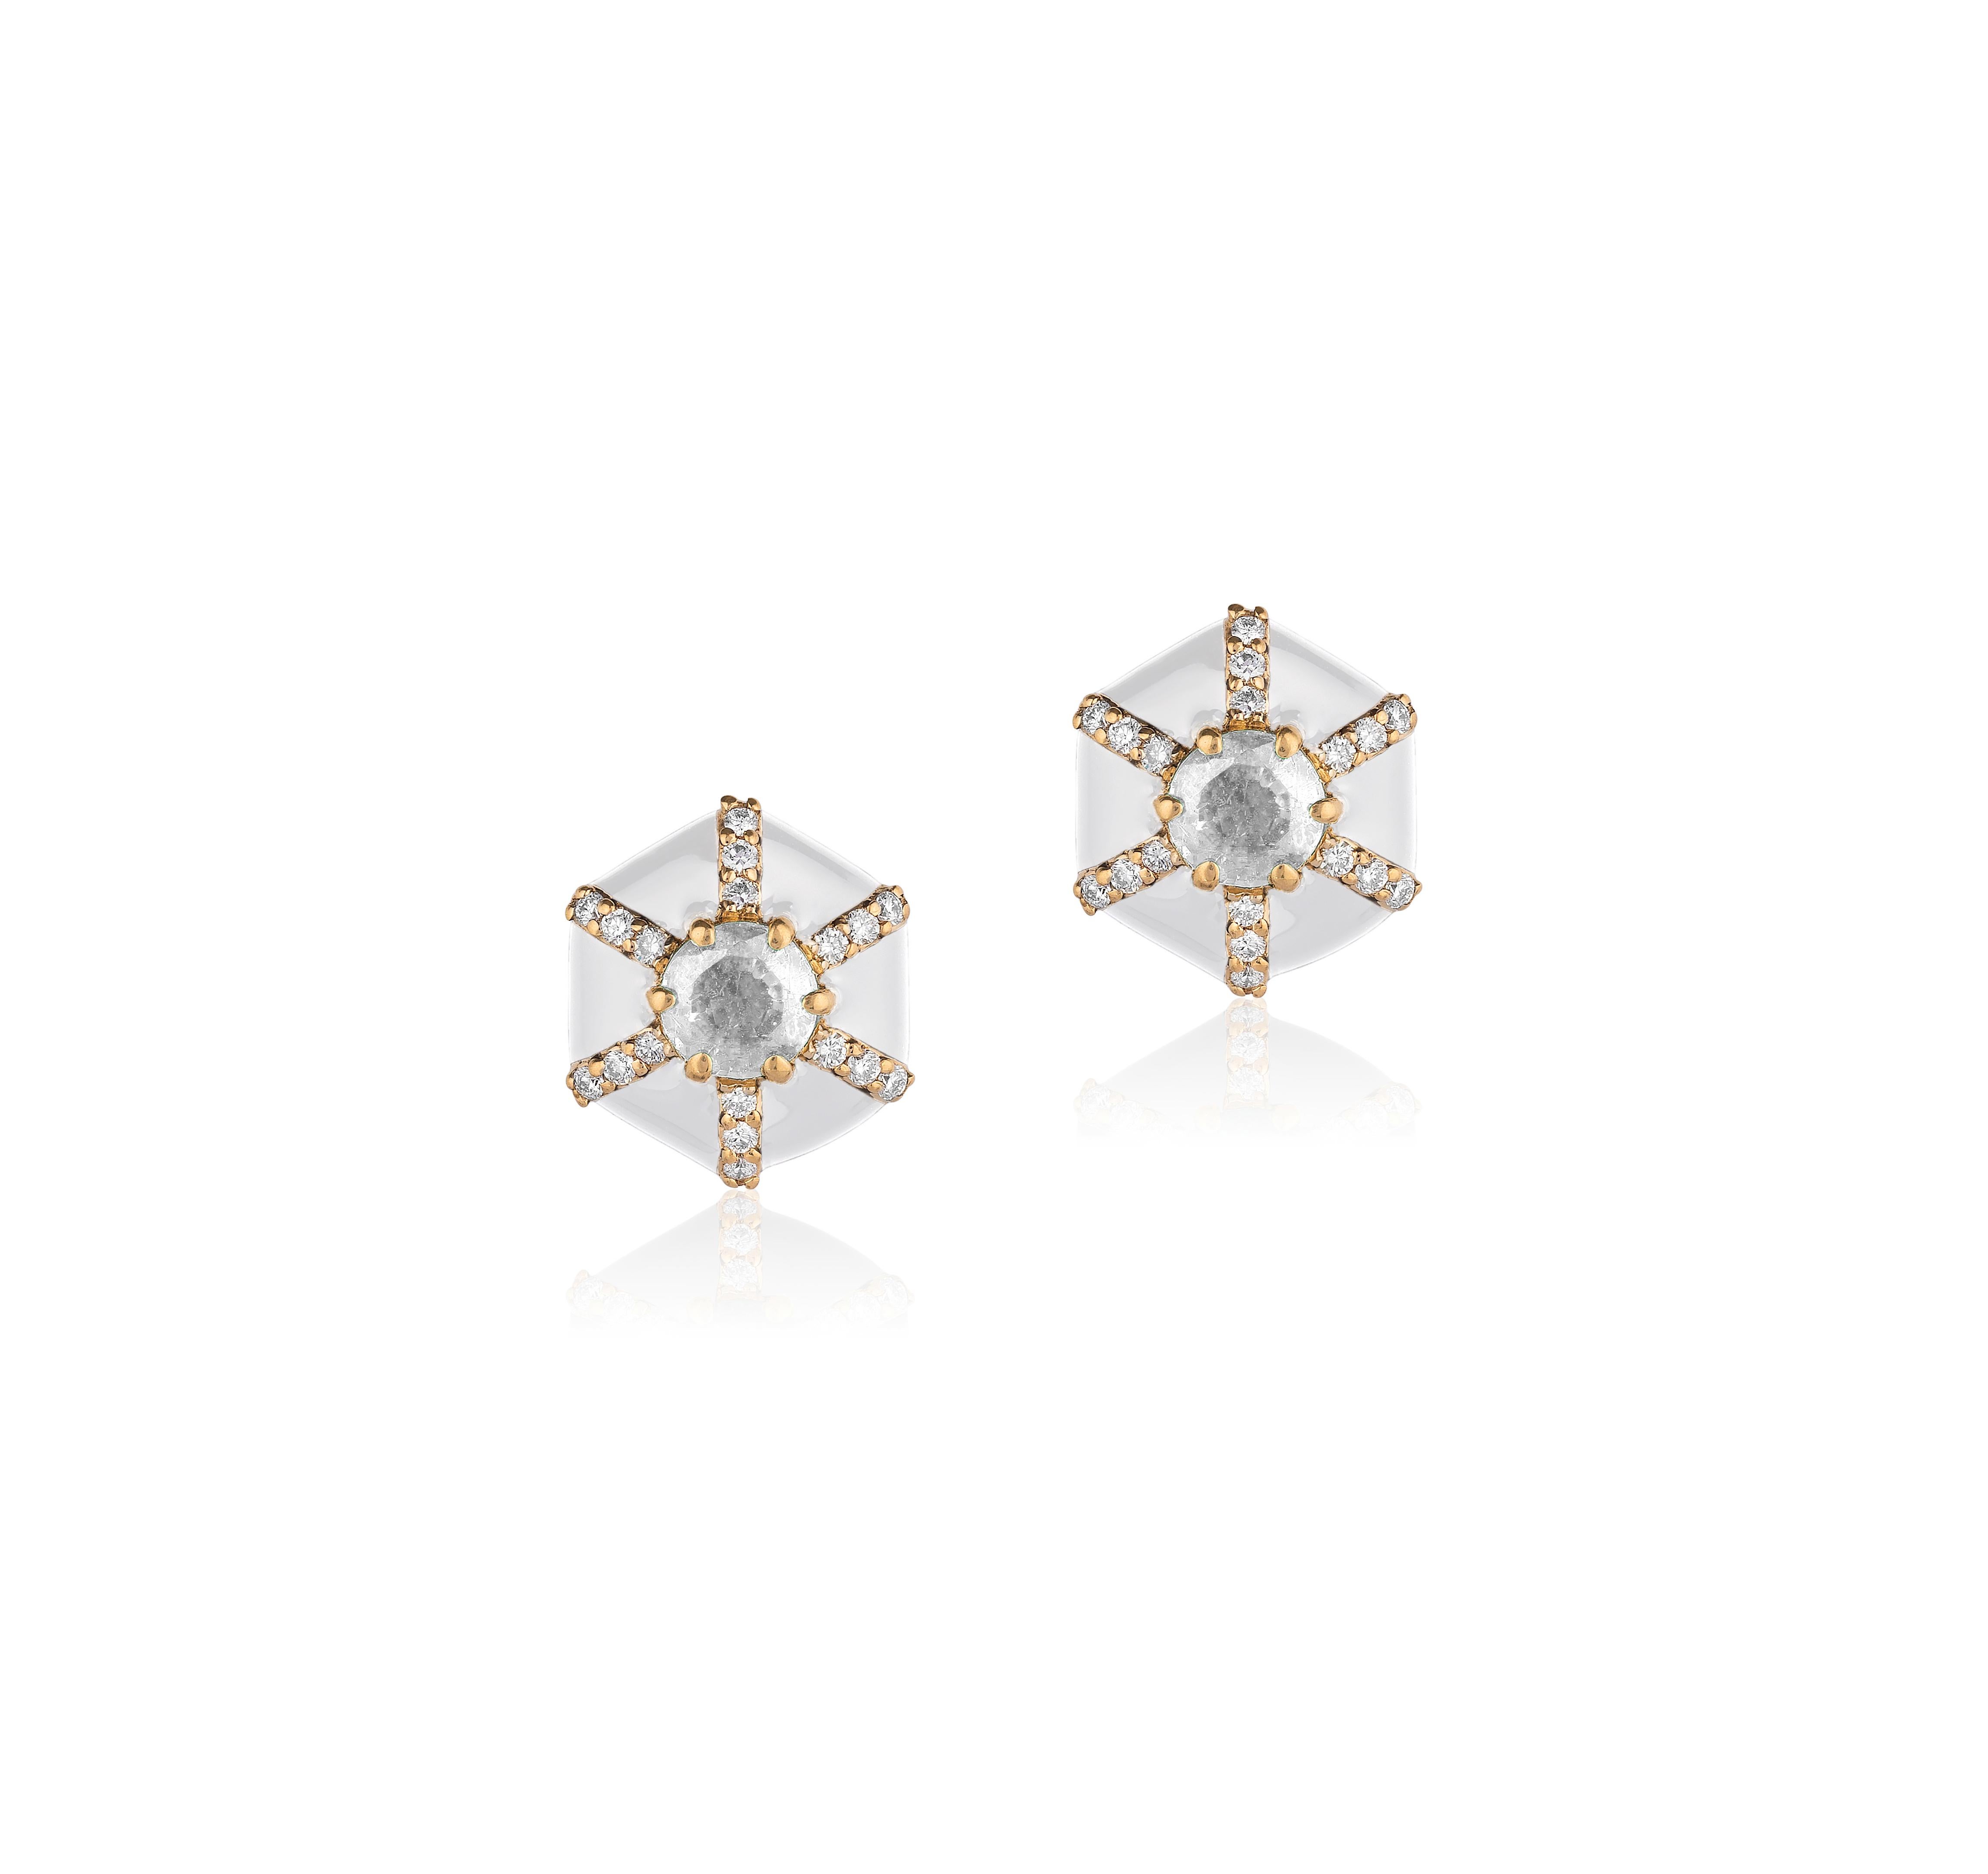 Hexagon White Enamel Stud Earrings with Diamonds in 18K Yellow Gold. from 'Queen' Collection
Stone Size: 4 mm
Diamonds: G-H / VS, Approx. Wt: 0.63 Carats